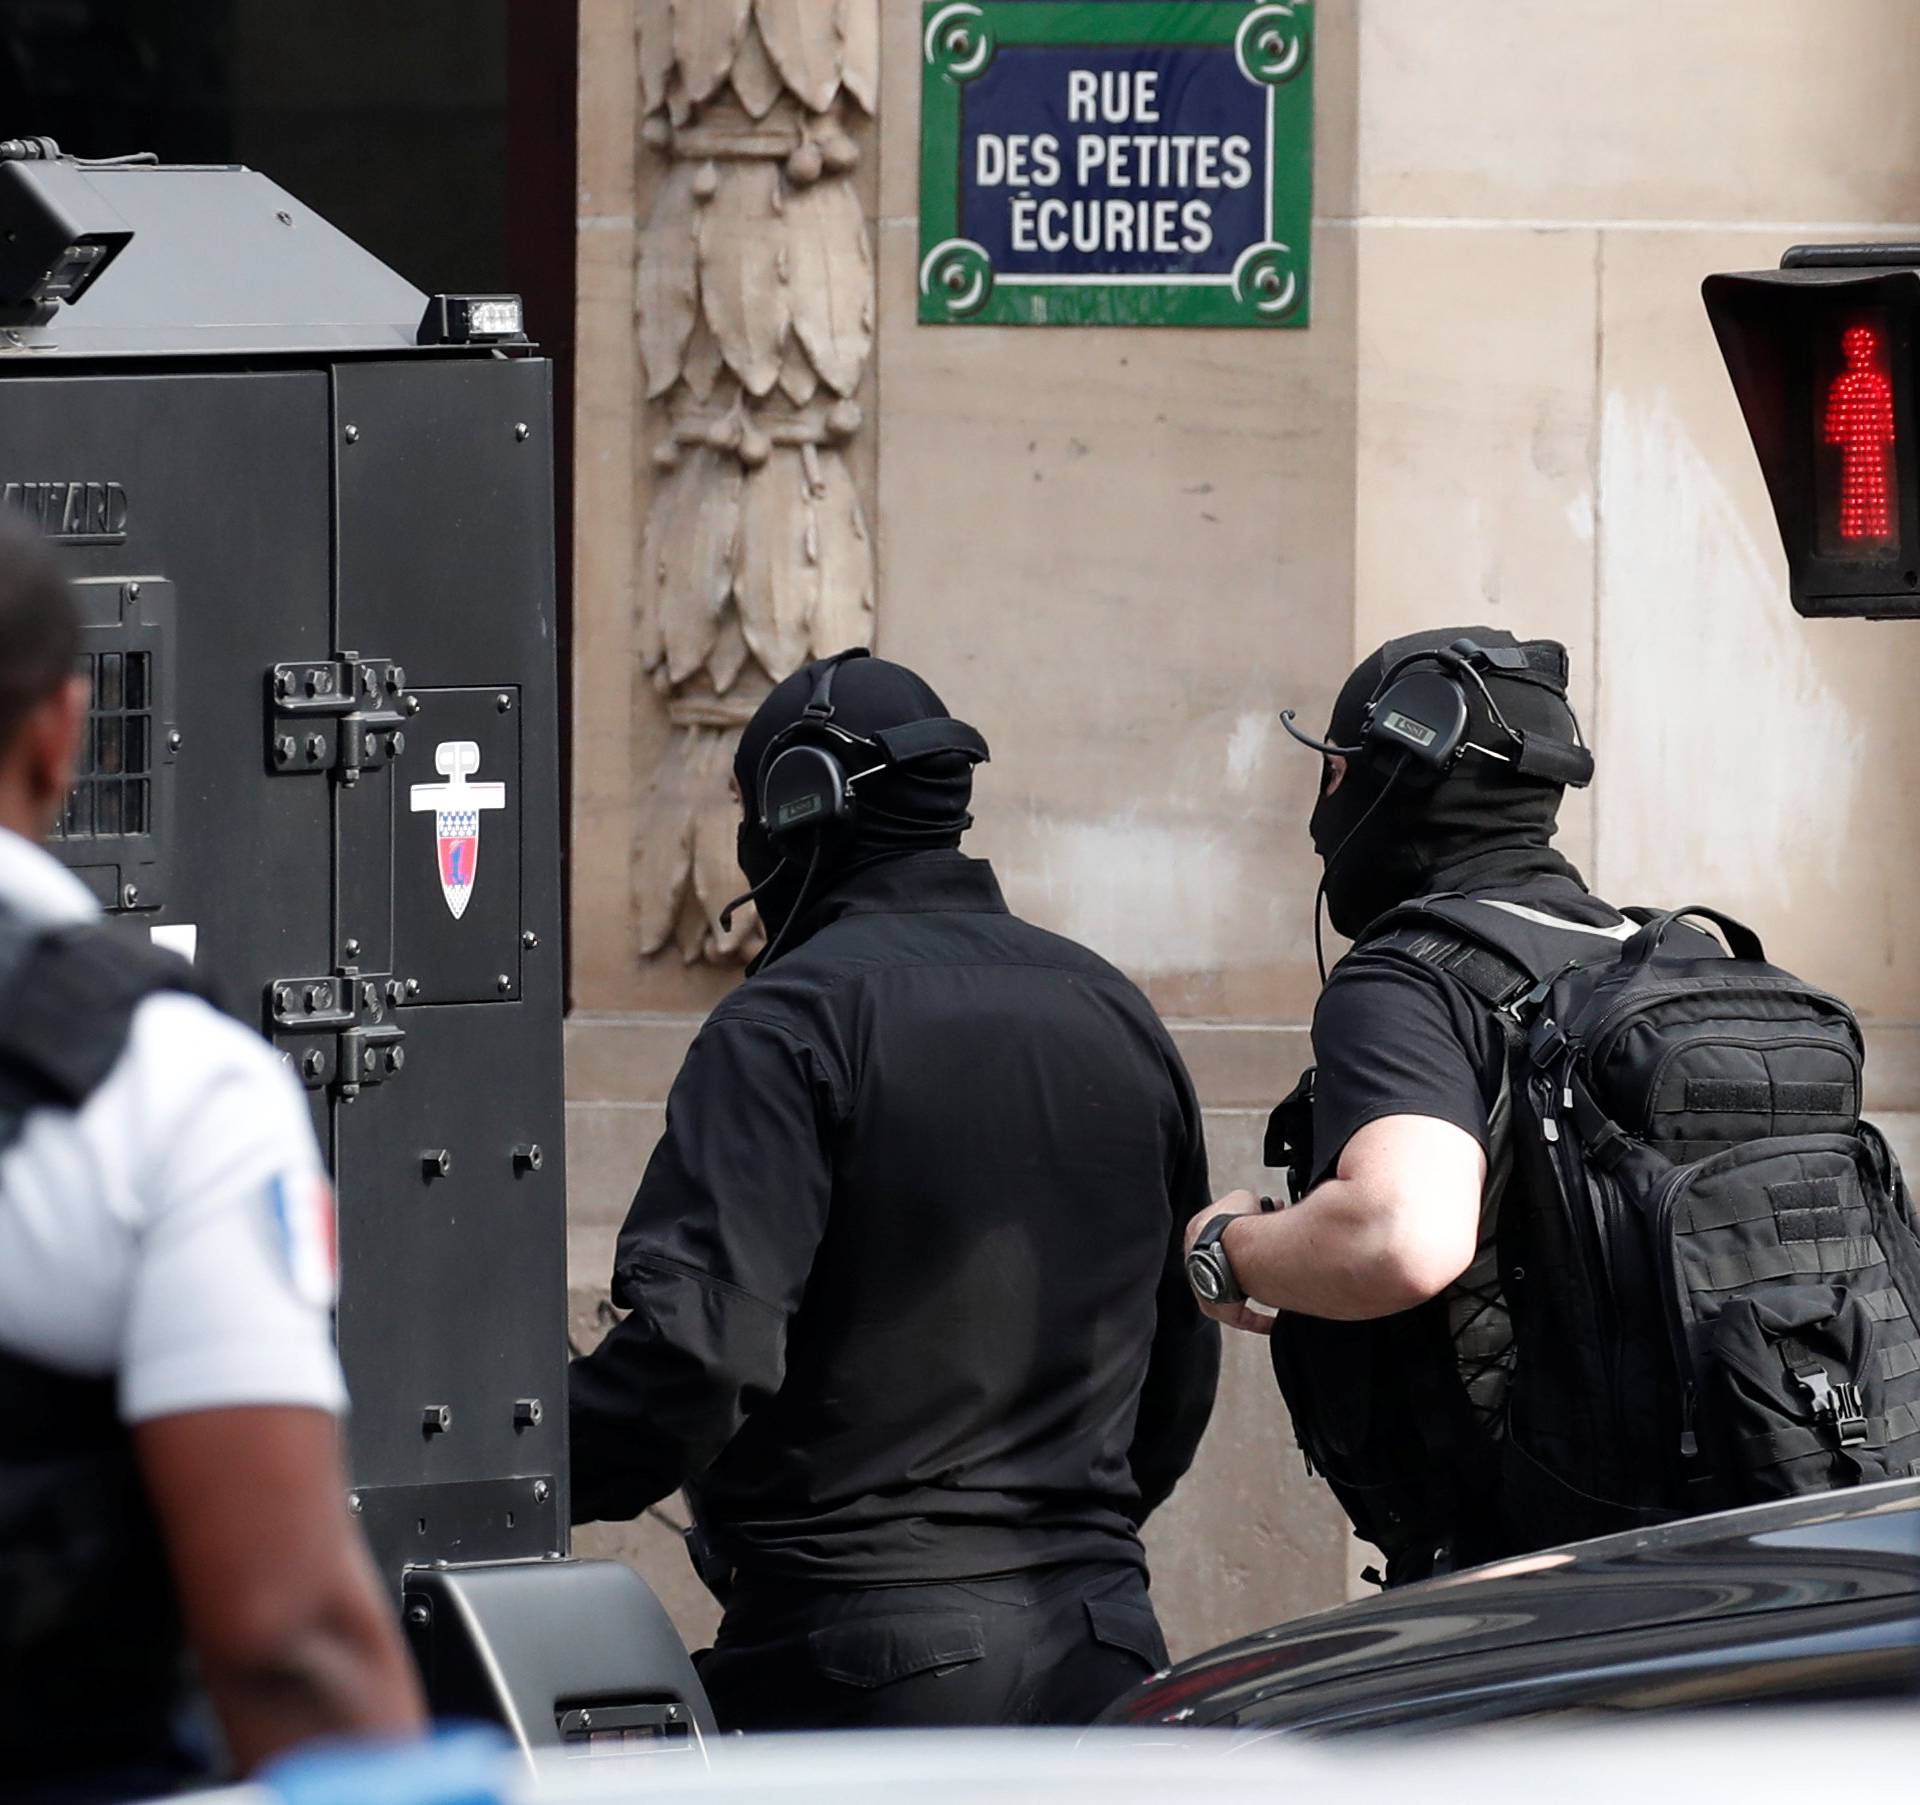 French special police forces (BRI) secure the street as a man has taken people hostage at a business in Paris